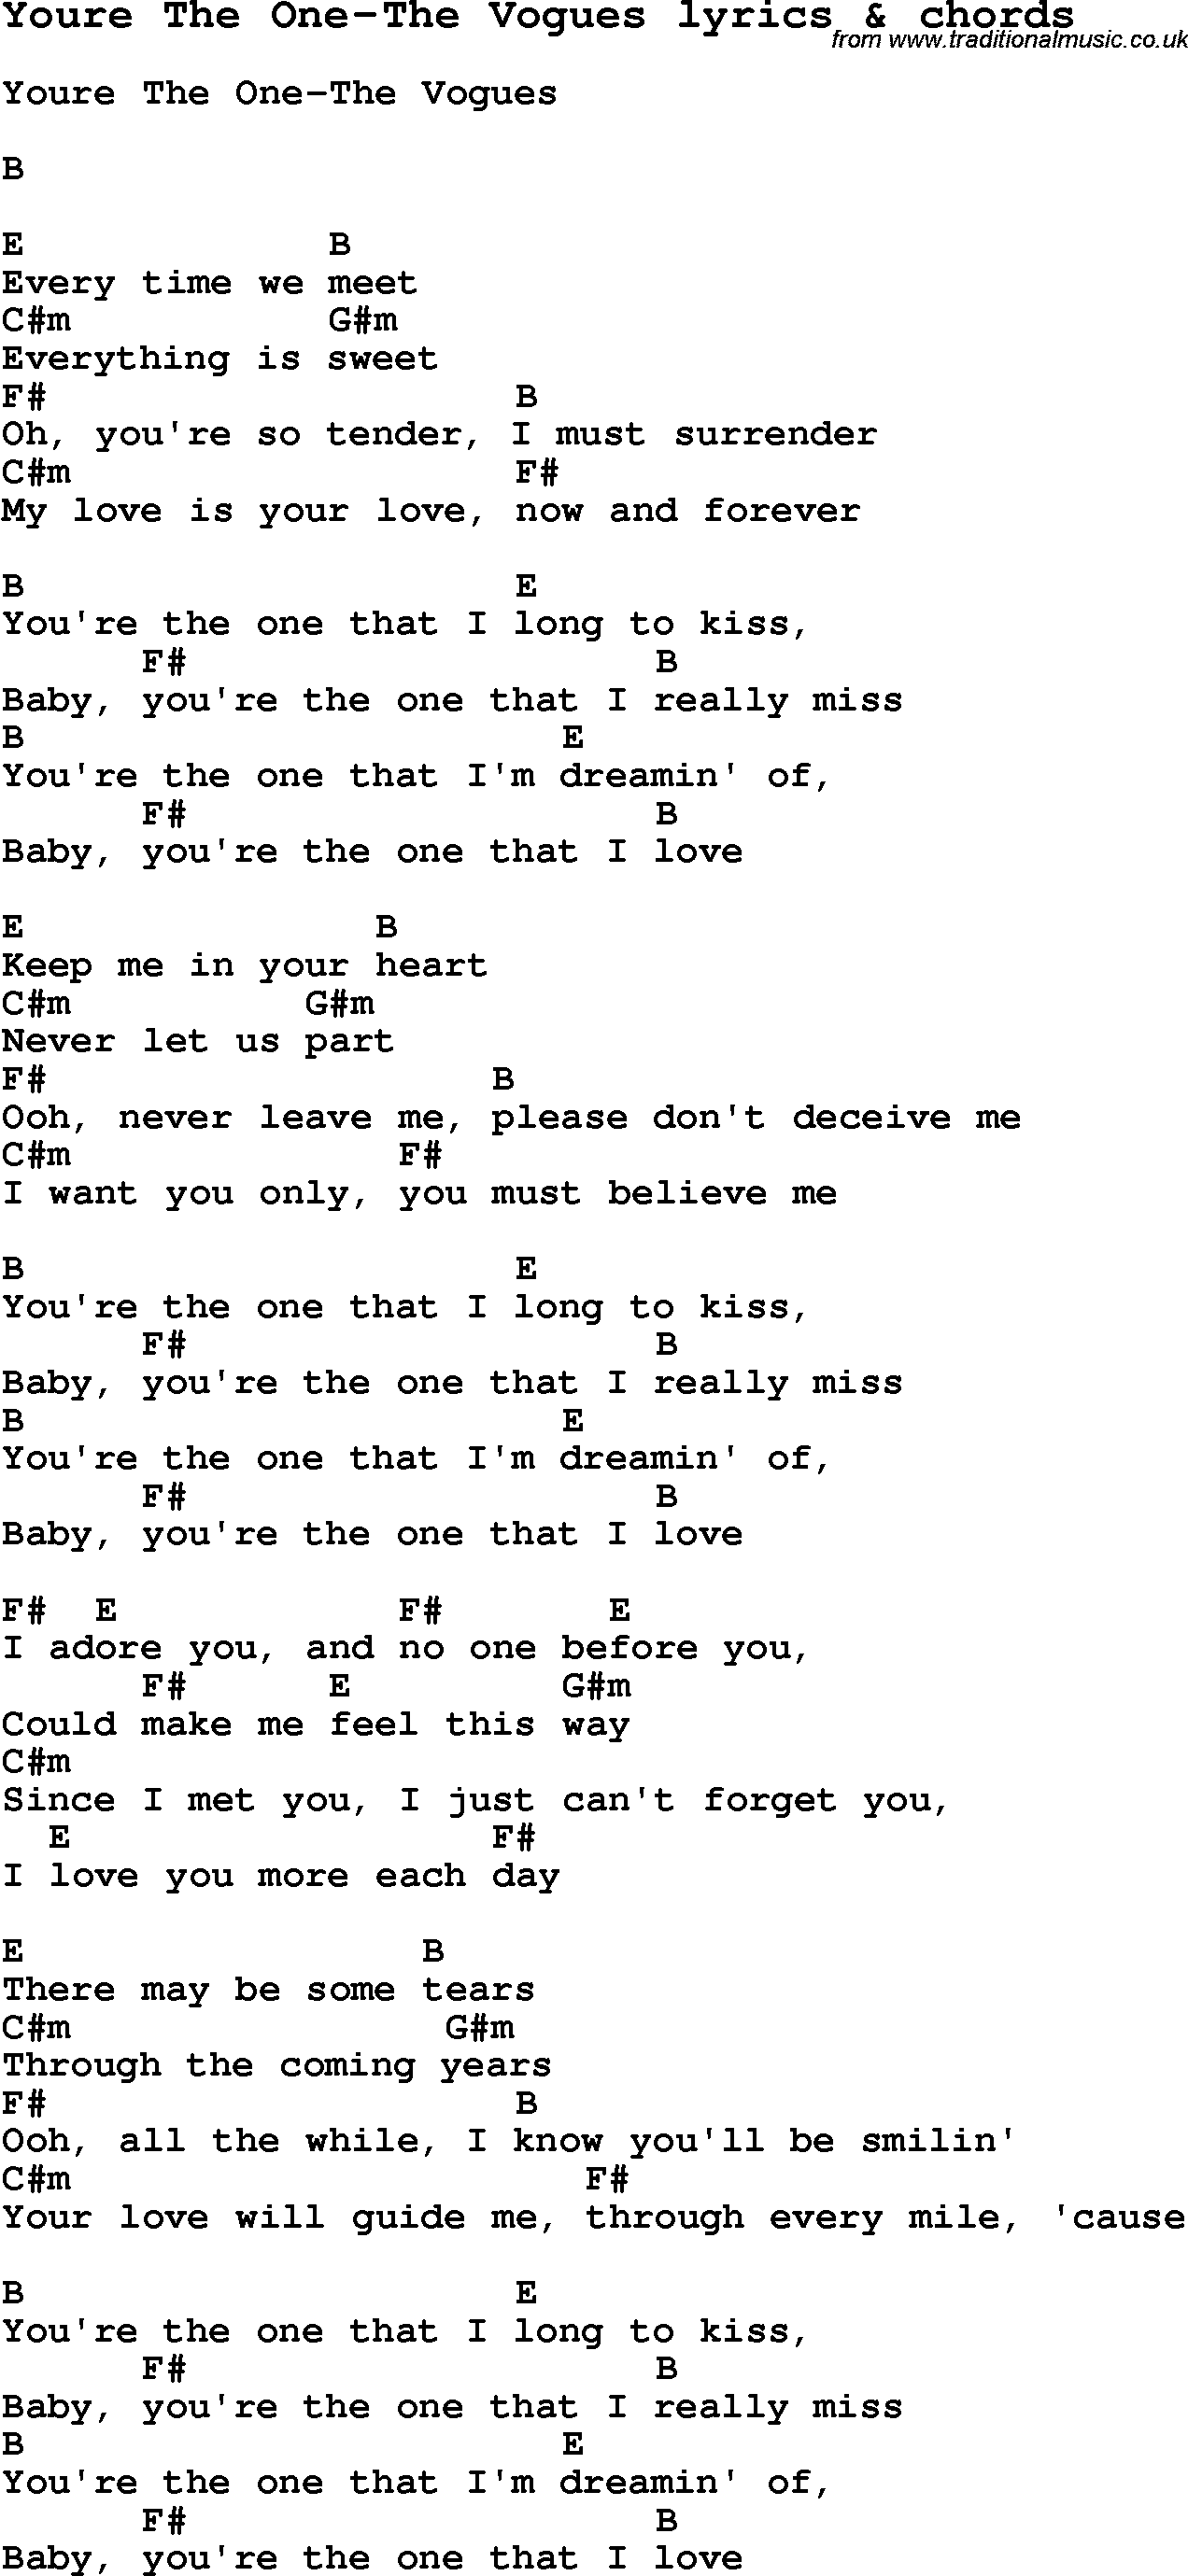 Love Song Lyrics for: Youre The One-The Vogues with chords for Ukulele, Guitar Banjo etc.